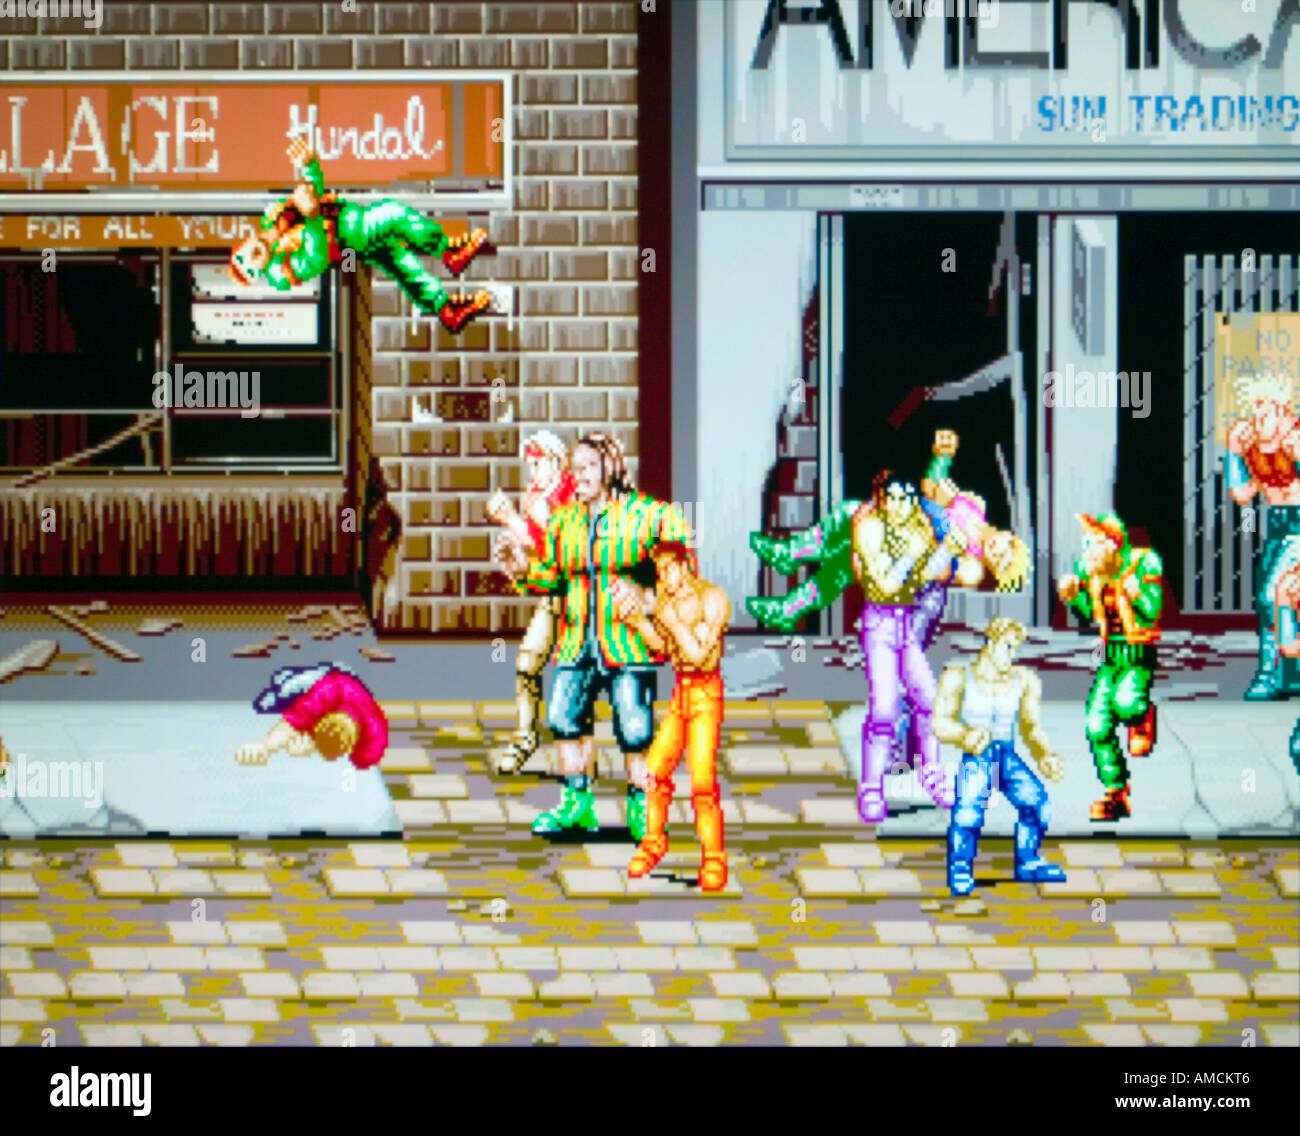 Karate Blazers Video System Co Ltd 1991 vintage arcade videogame screenshot - EDITORIAL USE ONLY Stock Photo